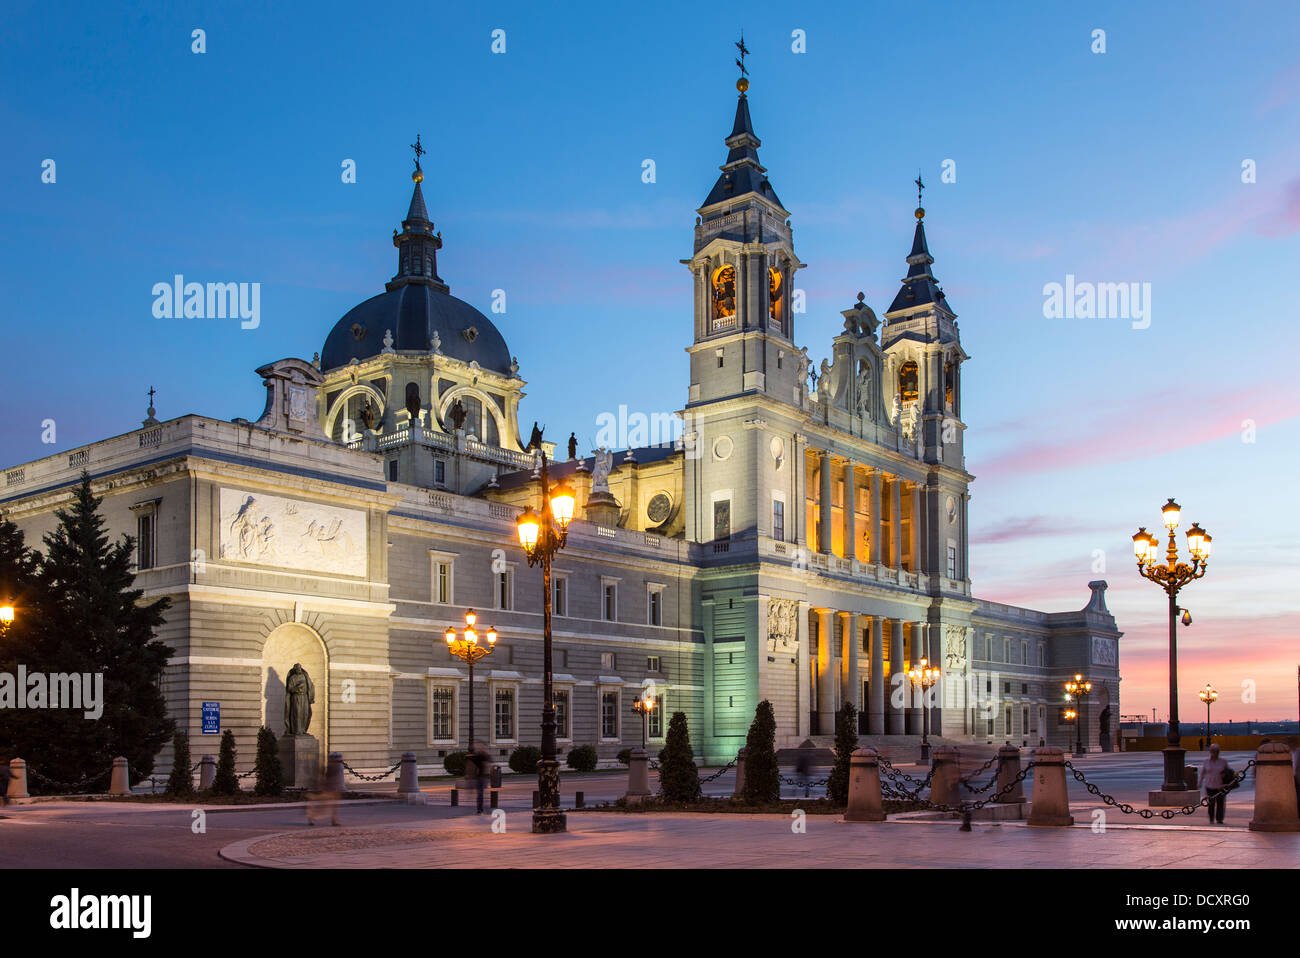 Madrid, Almudena Cathedral at Dusk Stock Photo